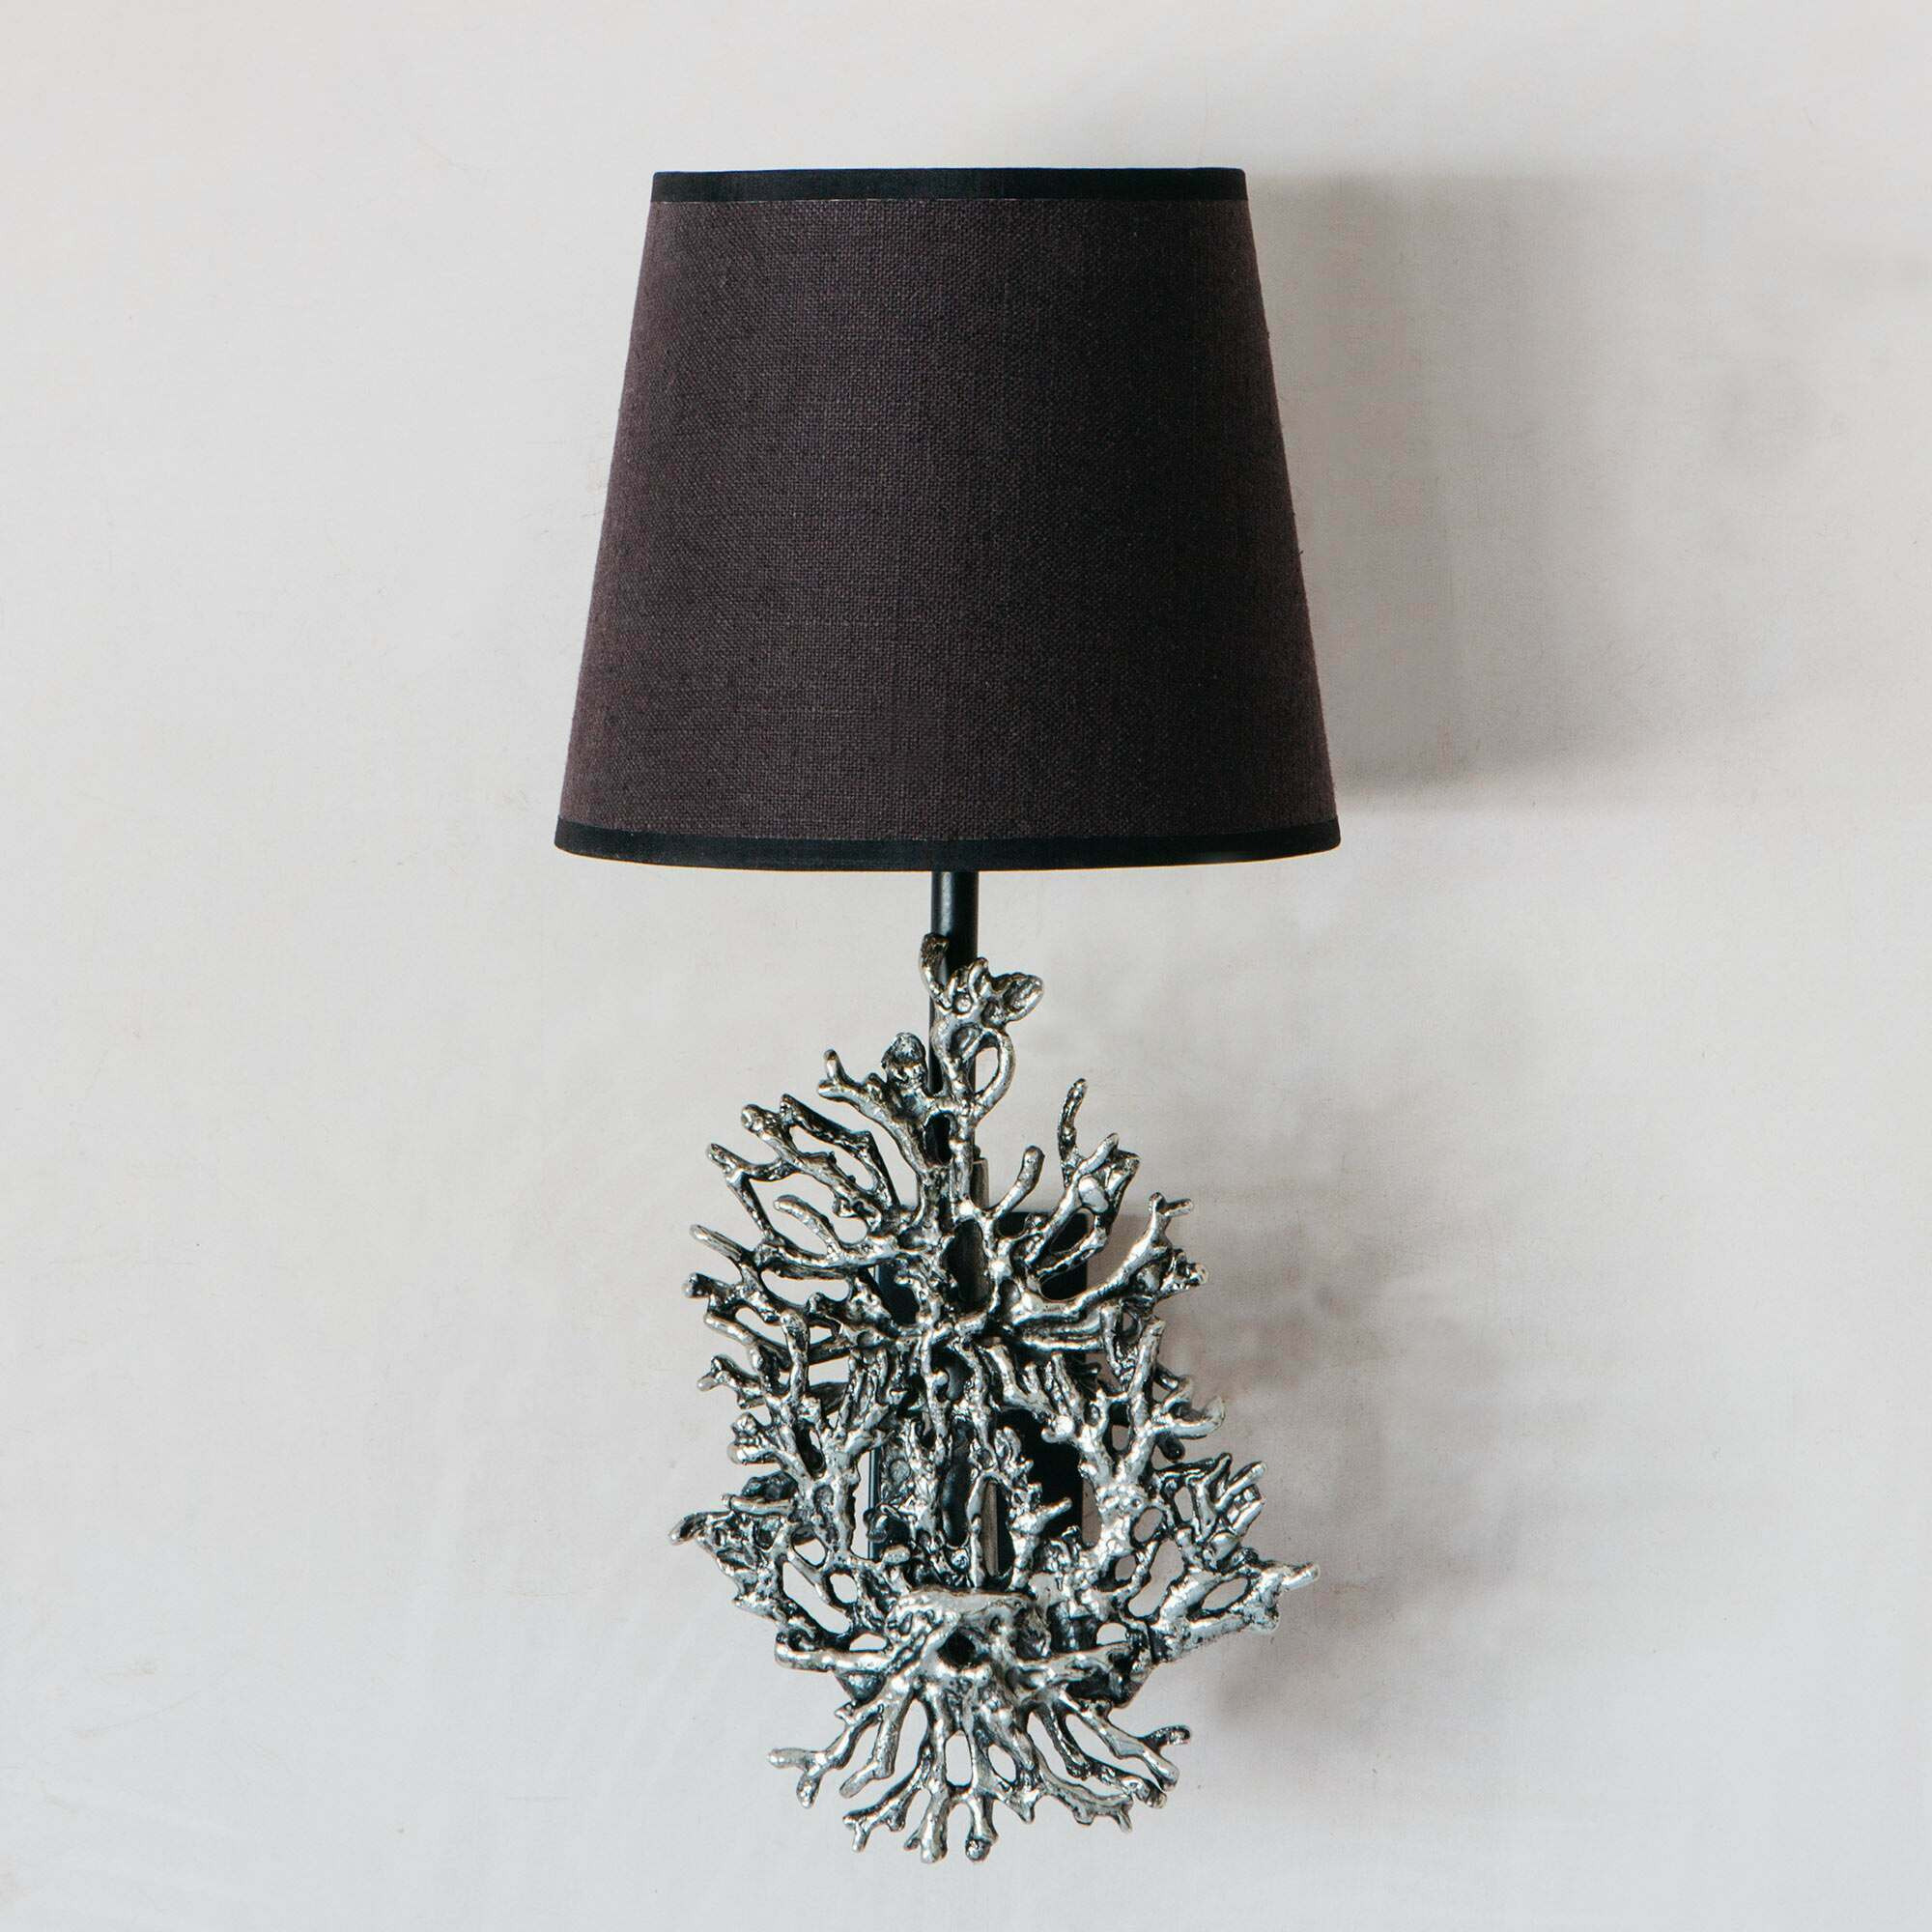 Antique Nickel Coral Wall Light - image 1